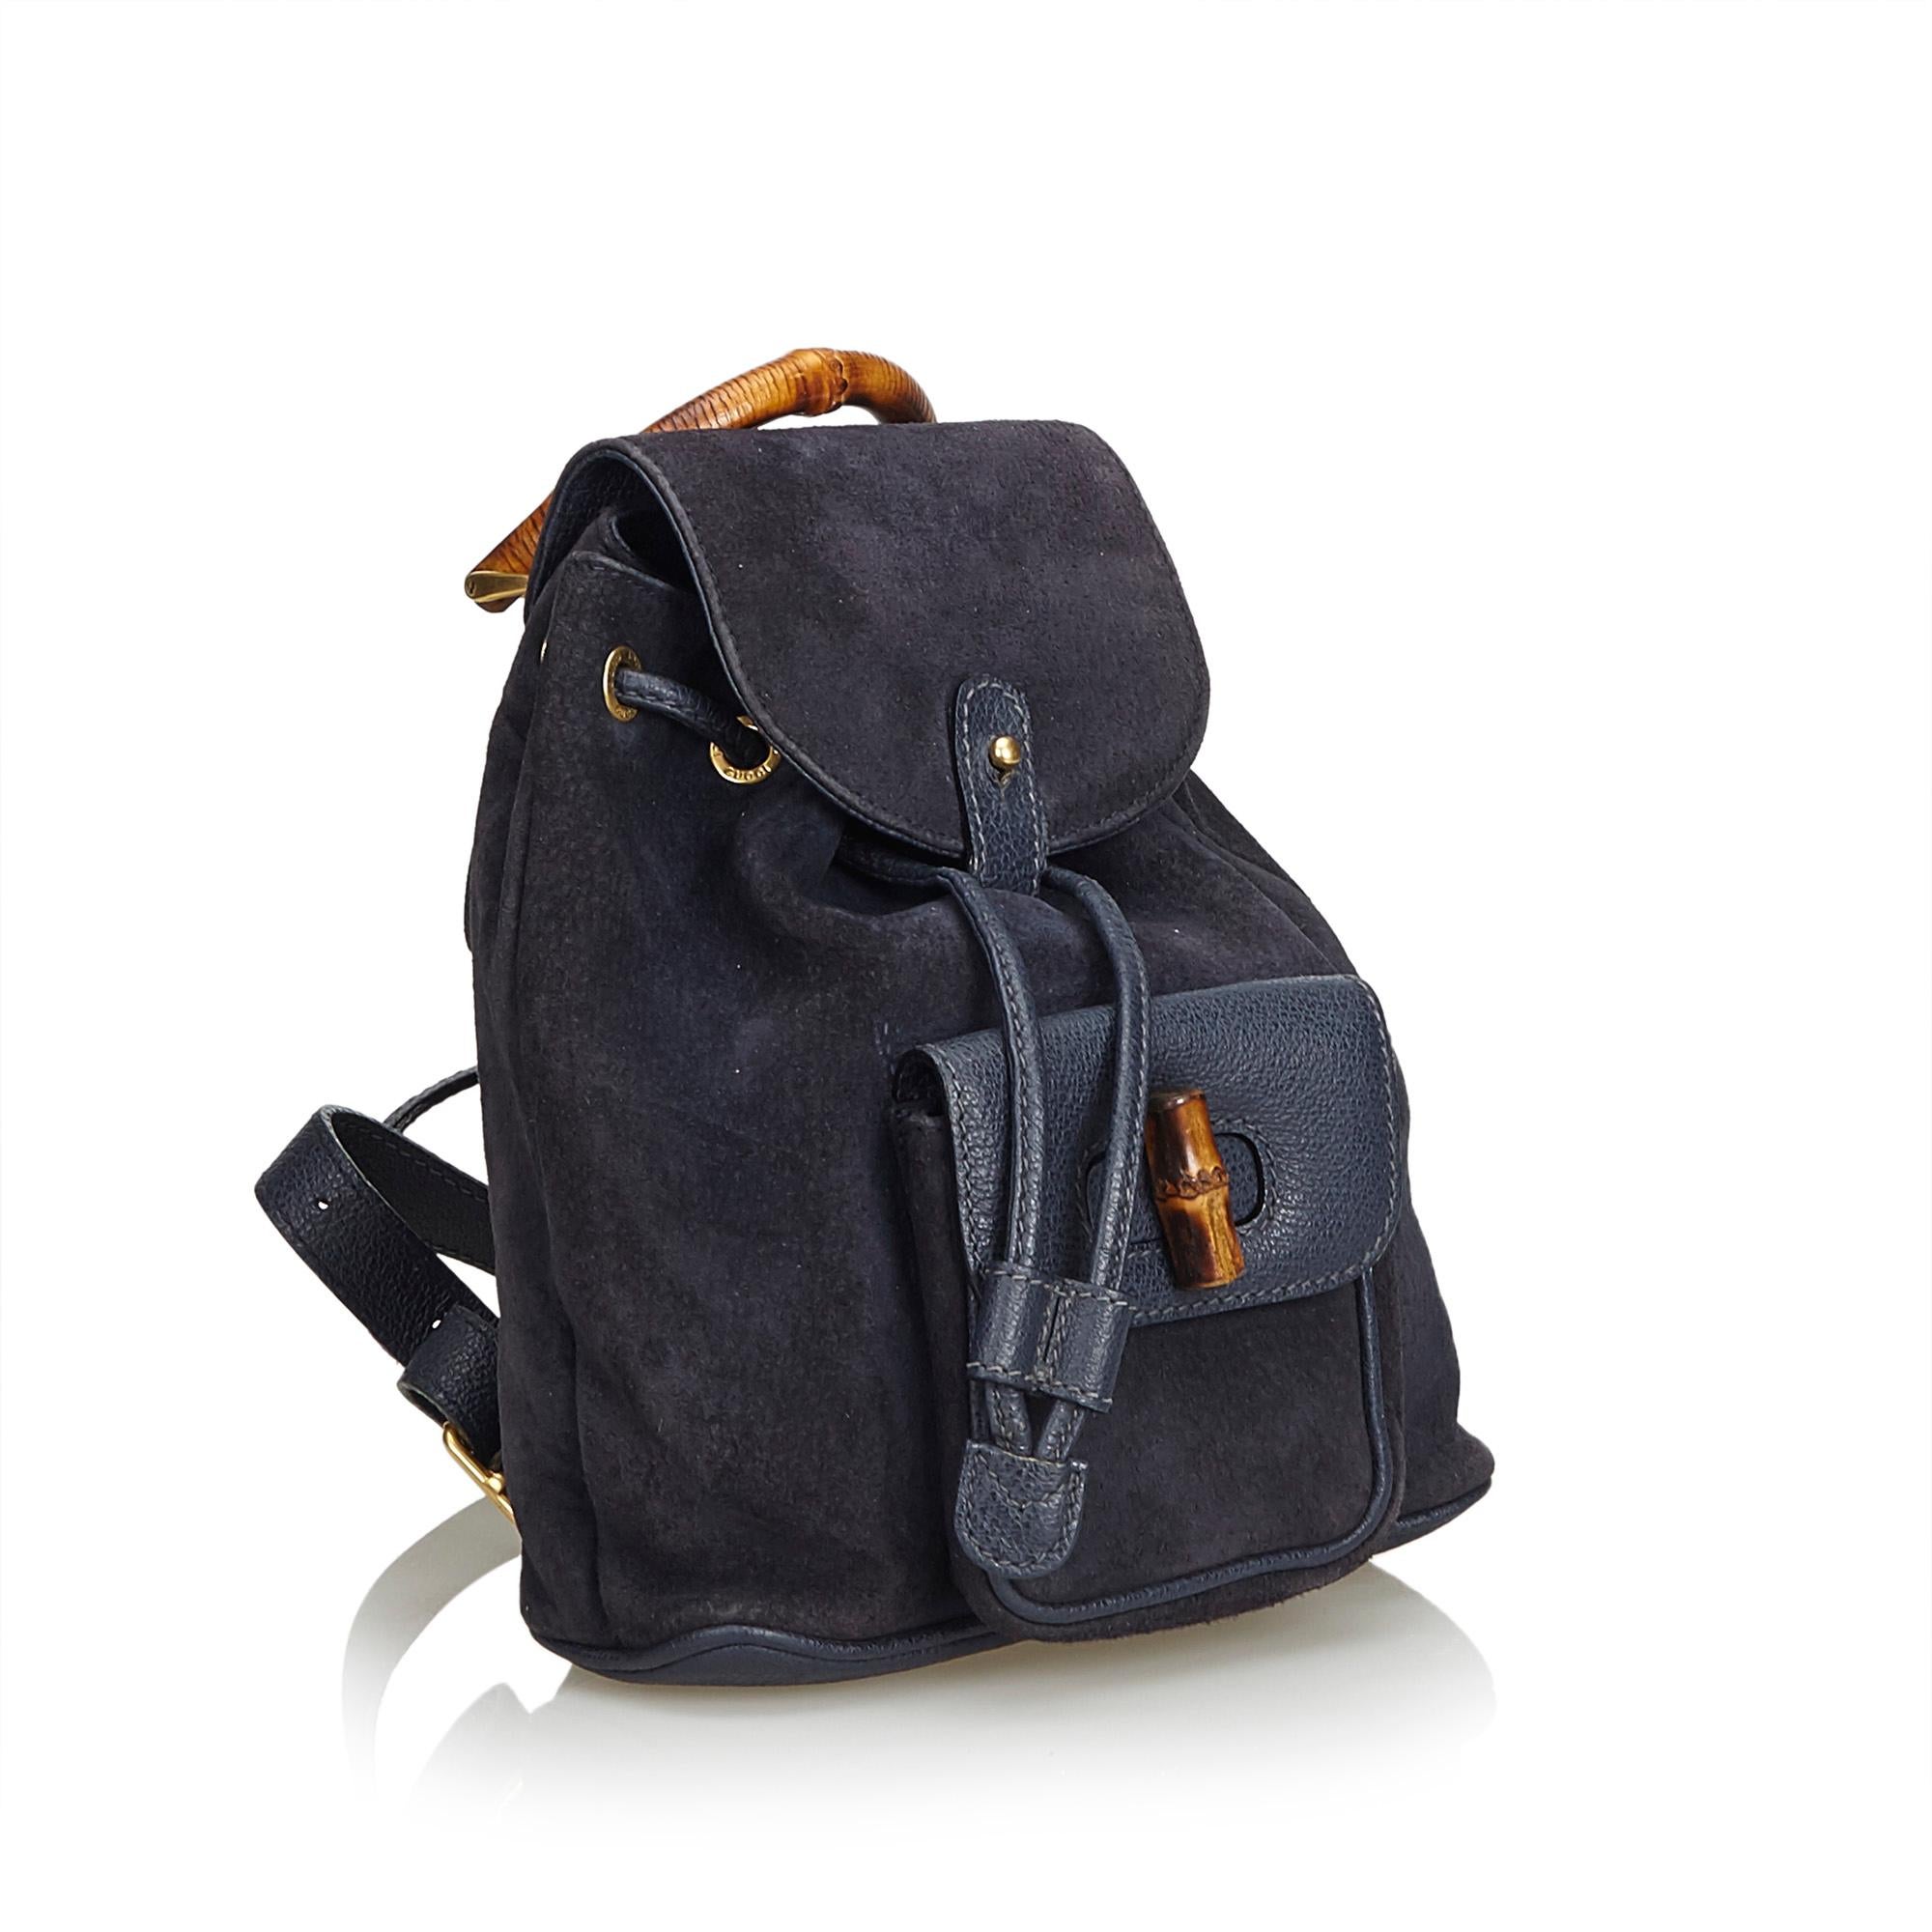 This backpack features a suede body, flat leather back straps, bamboo top handle, top flap with button closure, drawstring closure, exterior flap pocket with bamboo twist lock closure, and an interior zip pocket. It carries as B+ condition